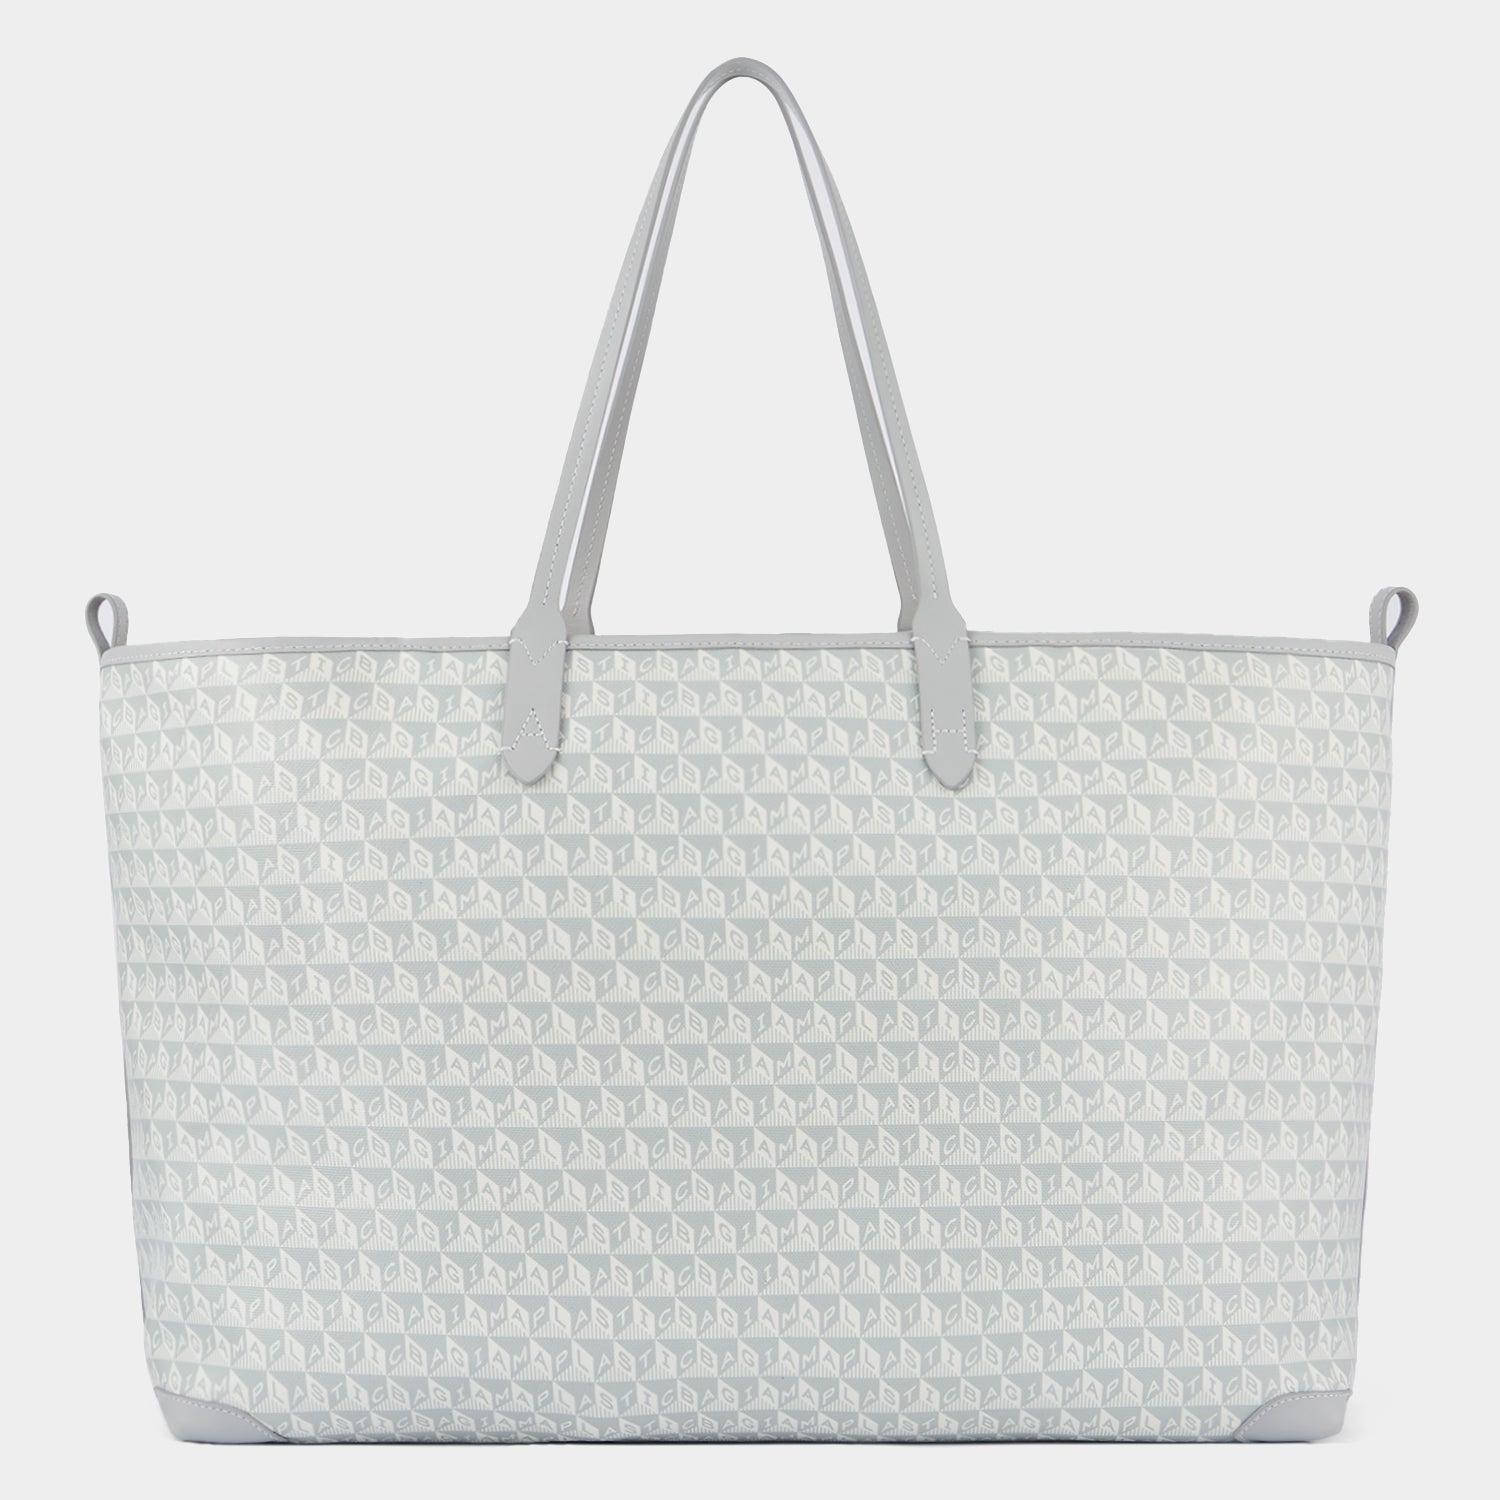 I am a Plastic Bag XL Wink Tote -

                  
                    Recycled Canvas in Frost -
                  

                  Anya Hindmarch UK
